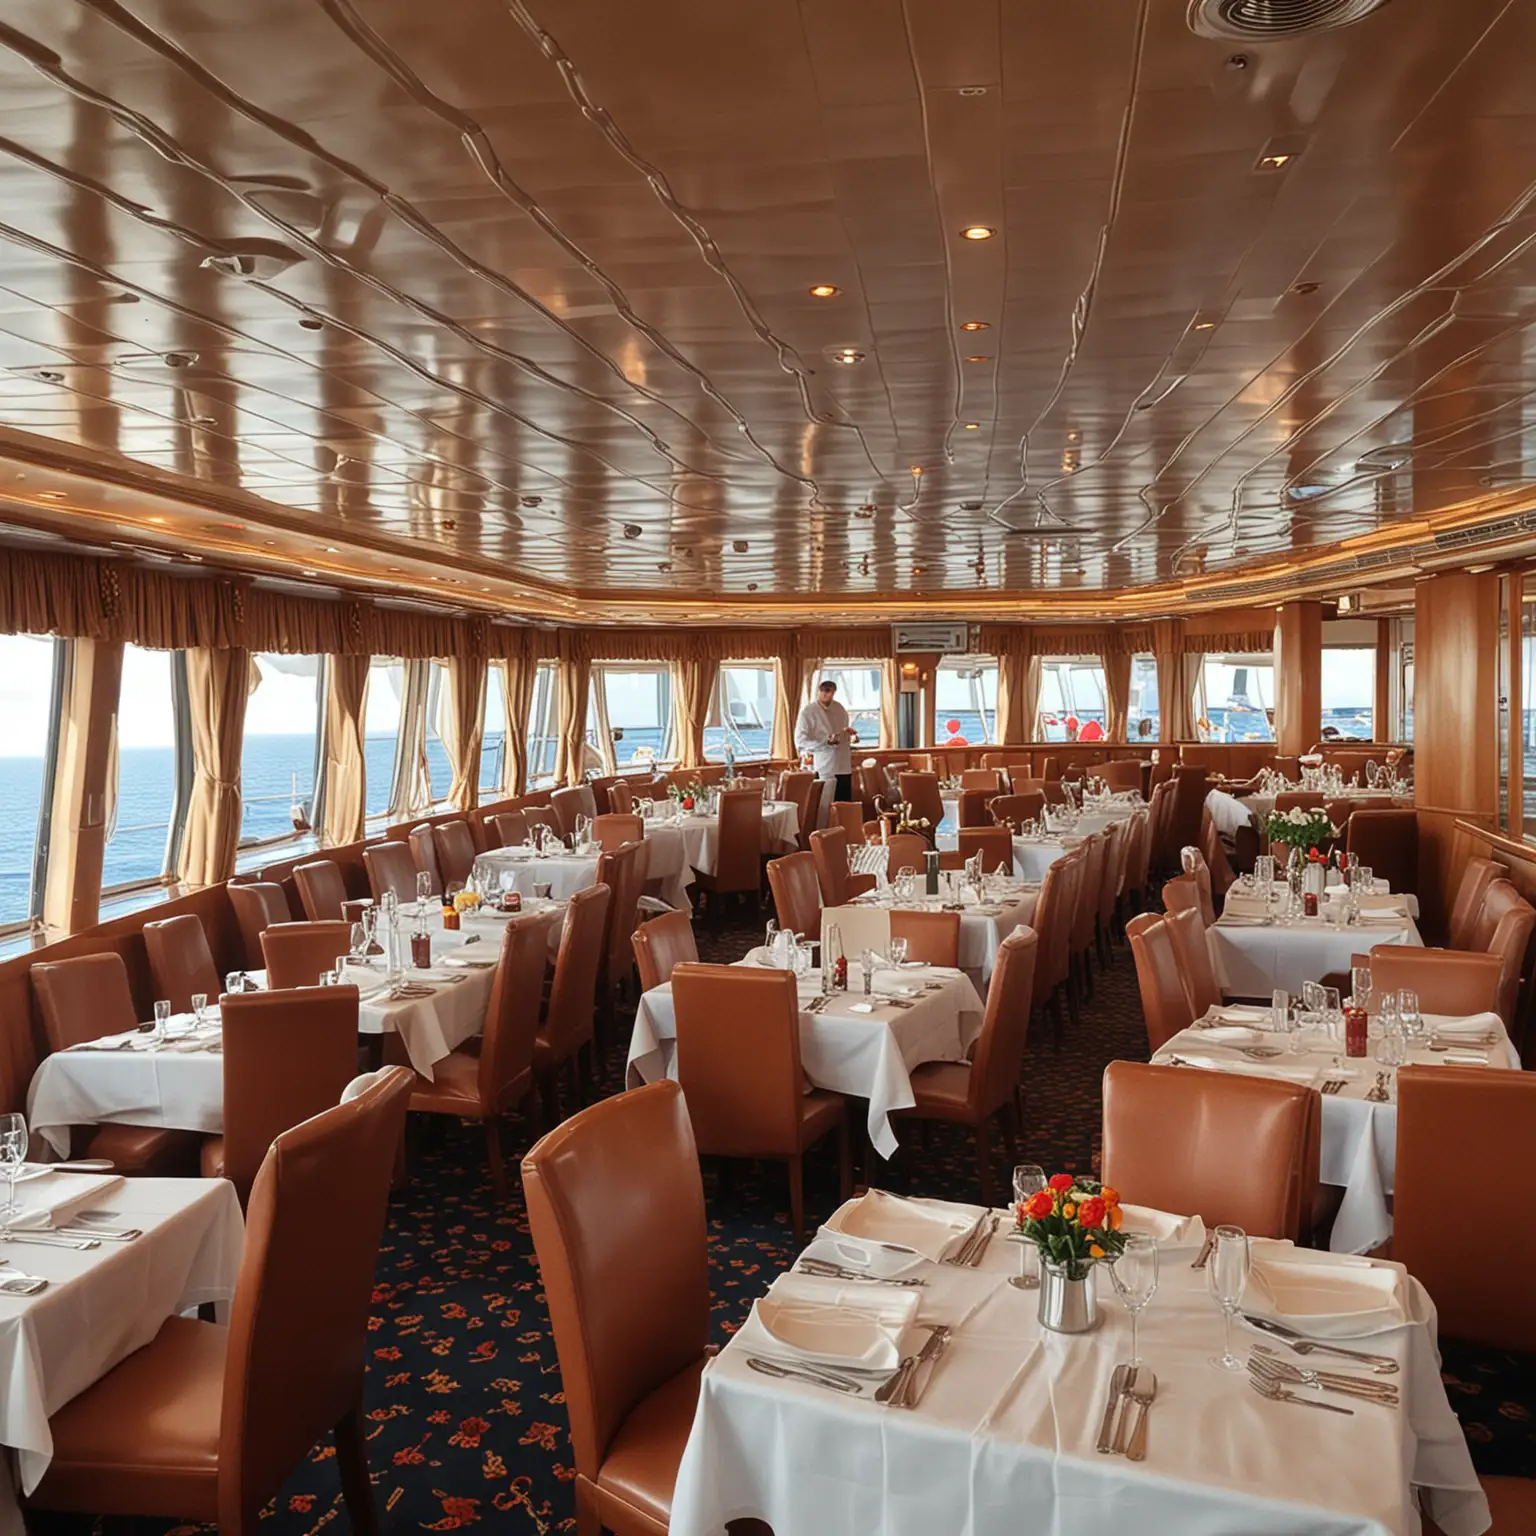 Luxurious Dining Experience in the Grand Dining Hall of a Cruise Ship